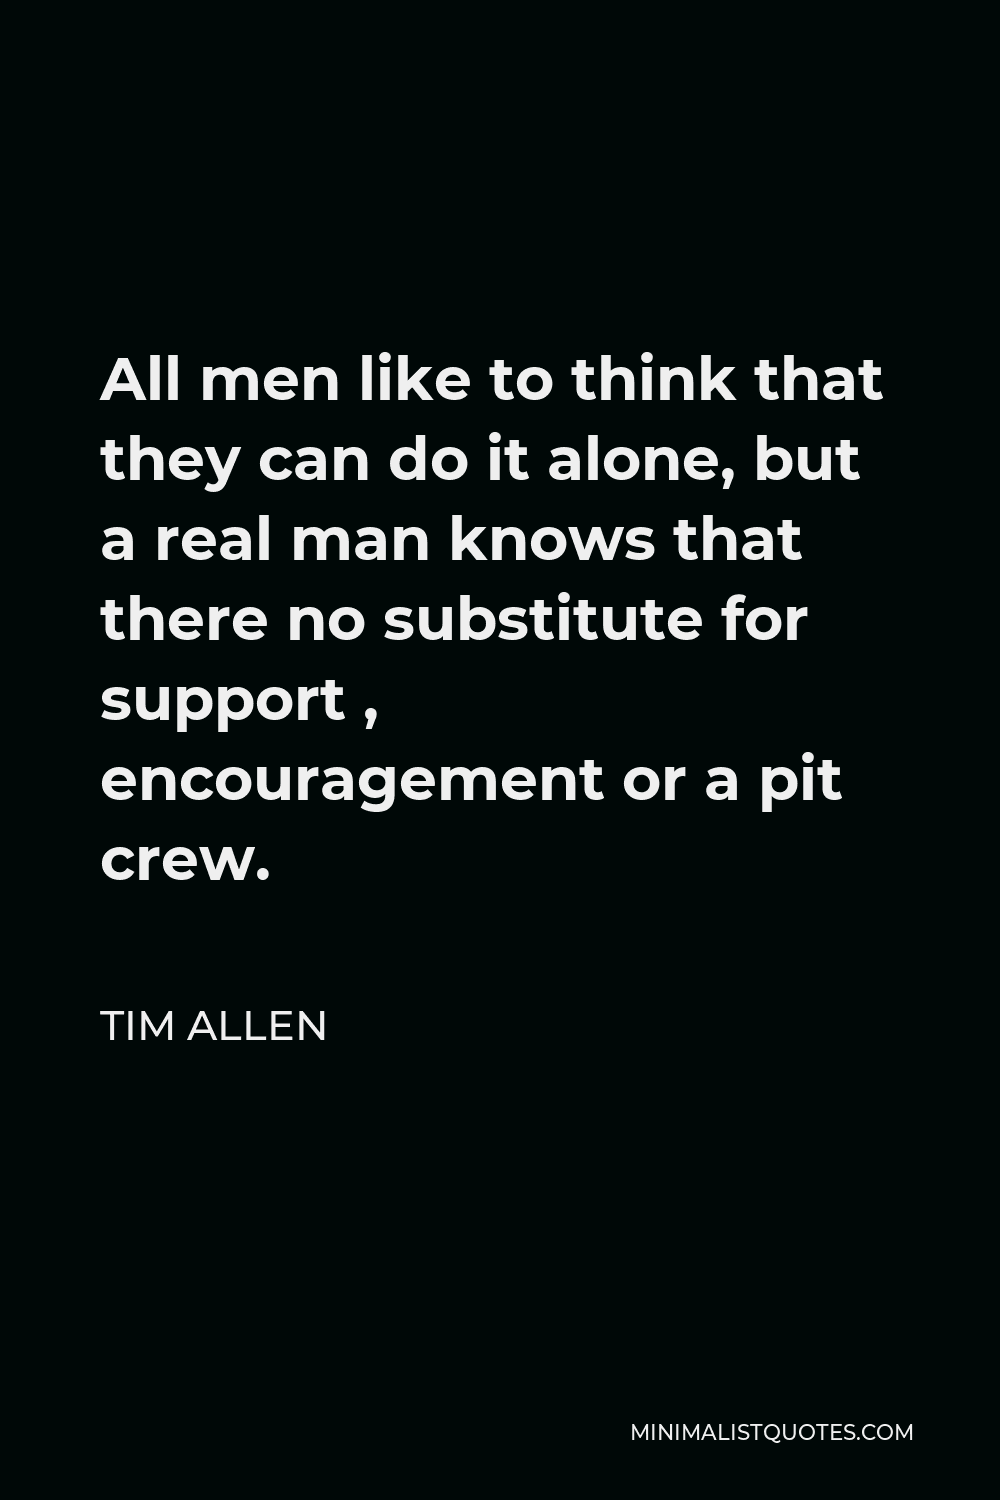 Tim Allen Quote - All men like to think that they can do it alone, but a real man knows that there no substitute for support , encouragement or a pit crew.